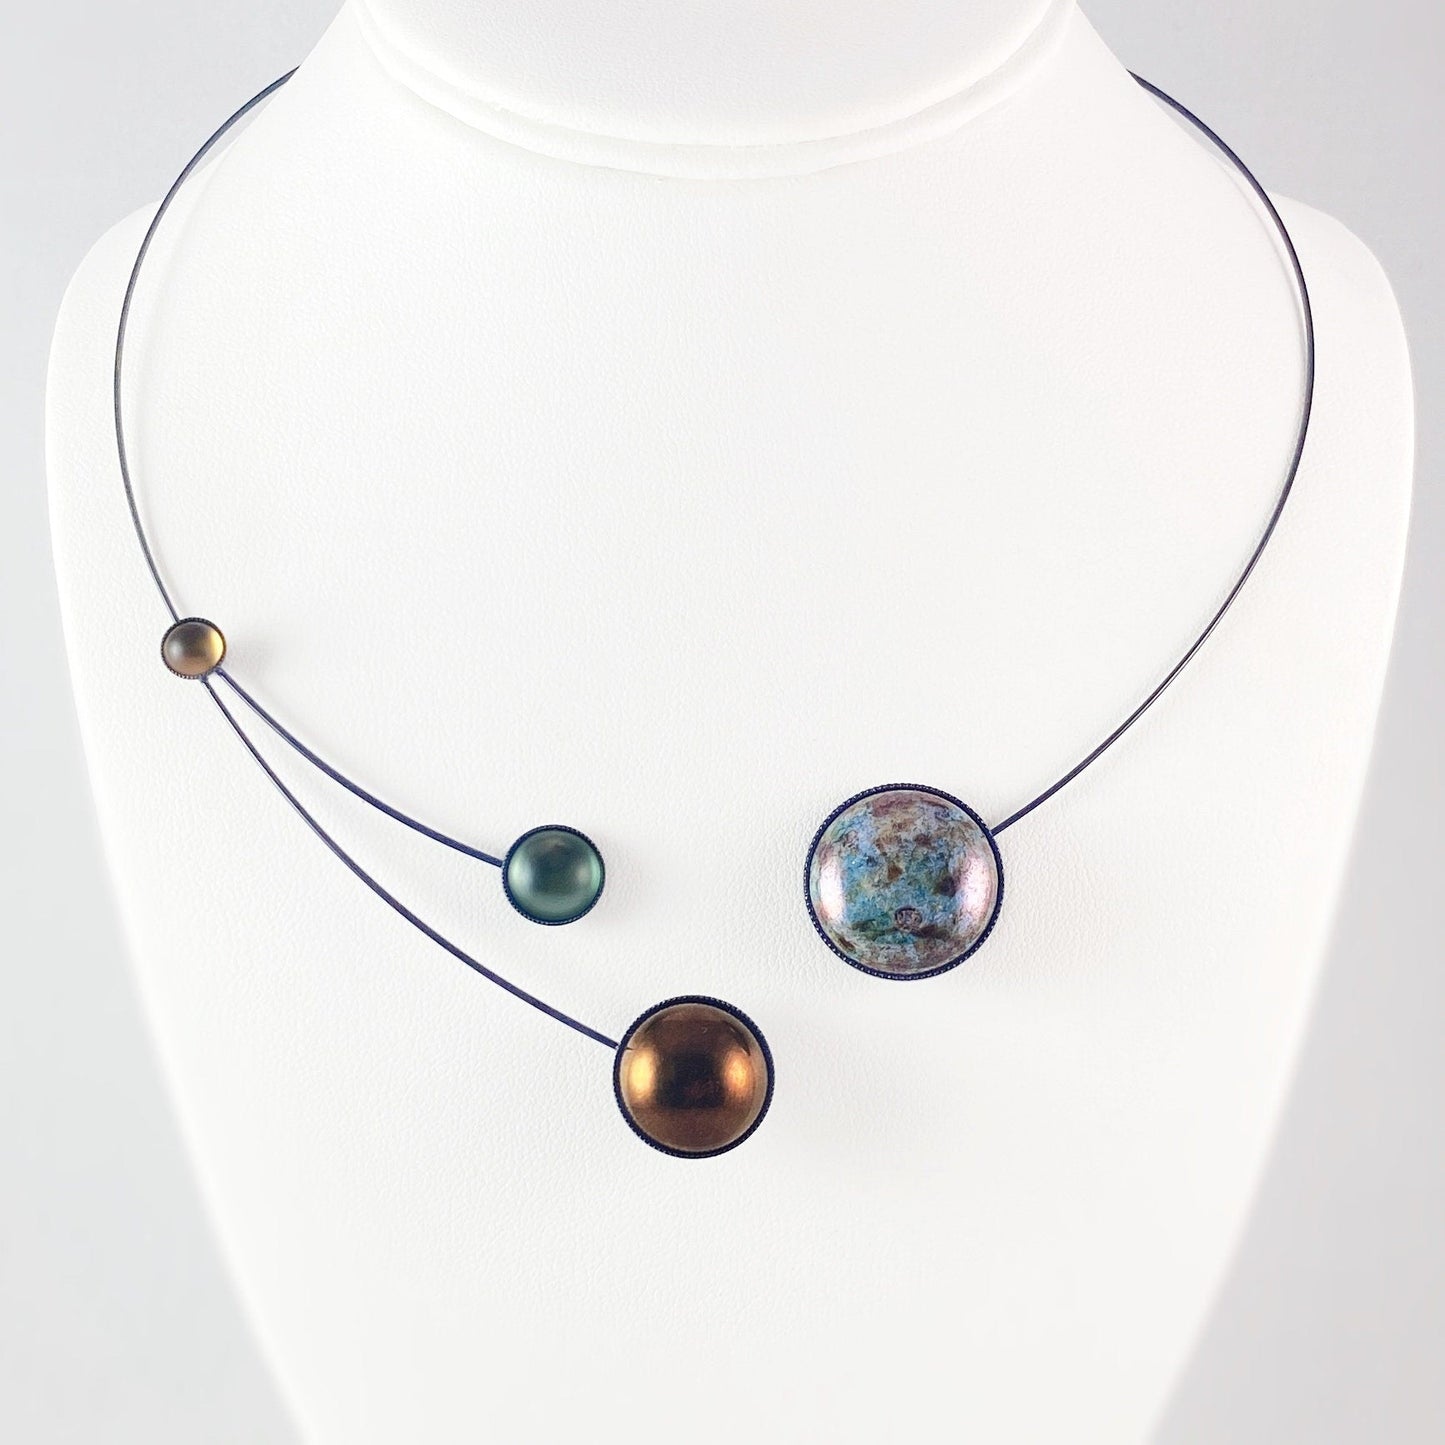 Black Memory Wire Floral Circle Necklace with Handmade Glass Beads, Hypoallergenic, Sage Green/Copper/Multi - Kristina